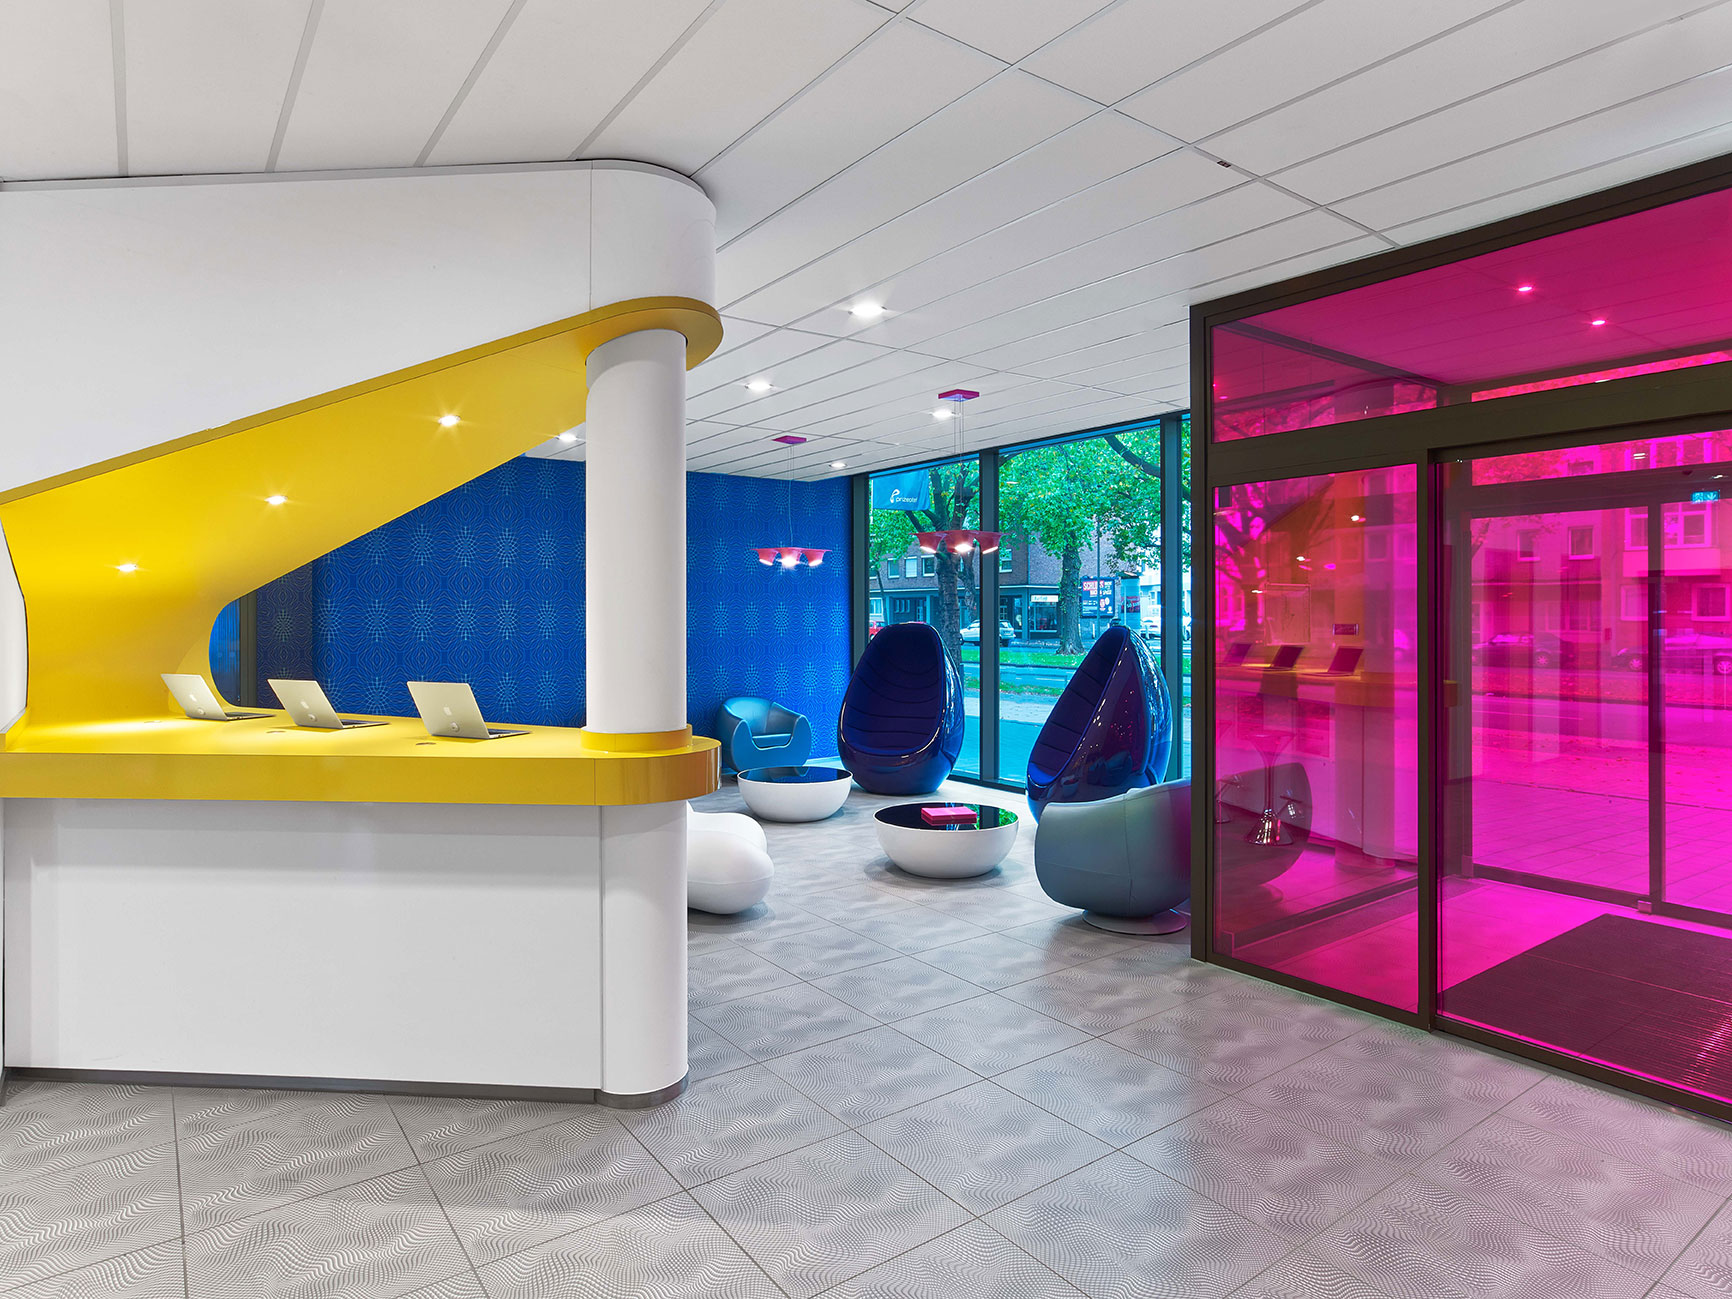 Reception at prizeotel Hanover-City with a small lounge and a colourful entrance door